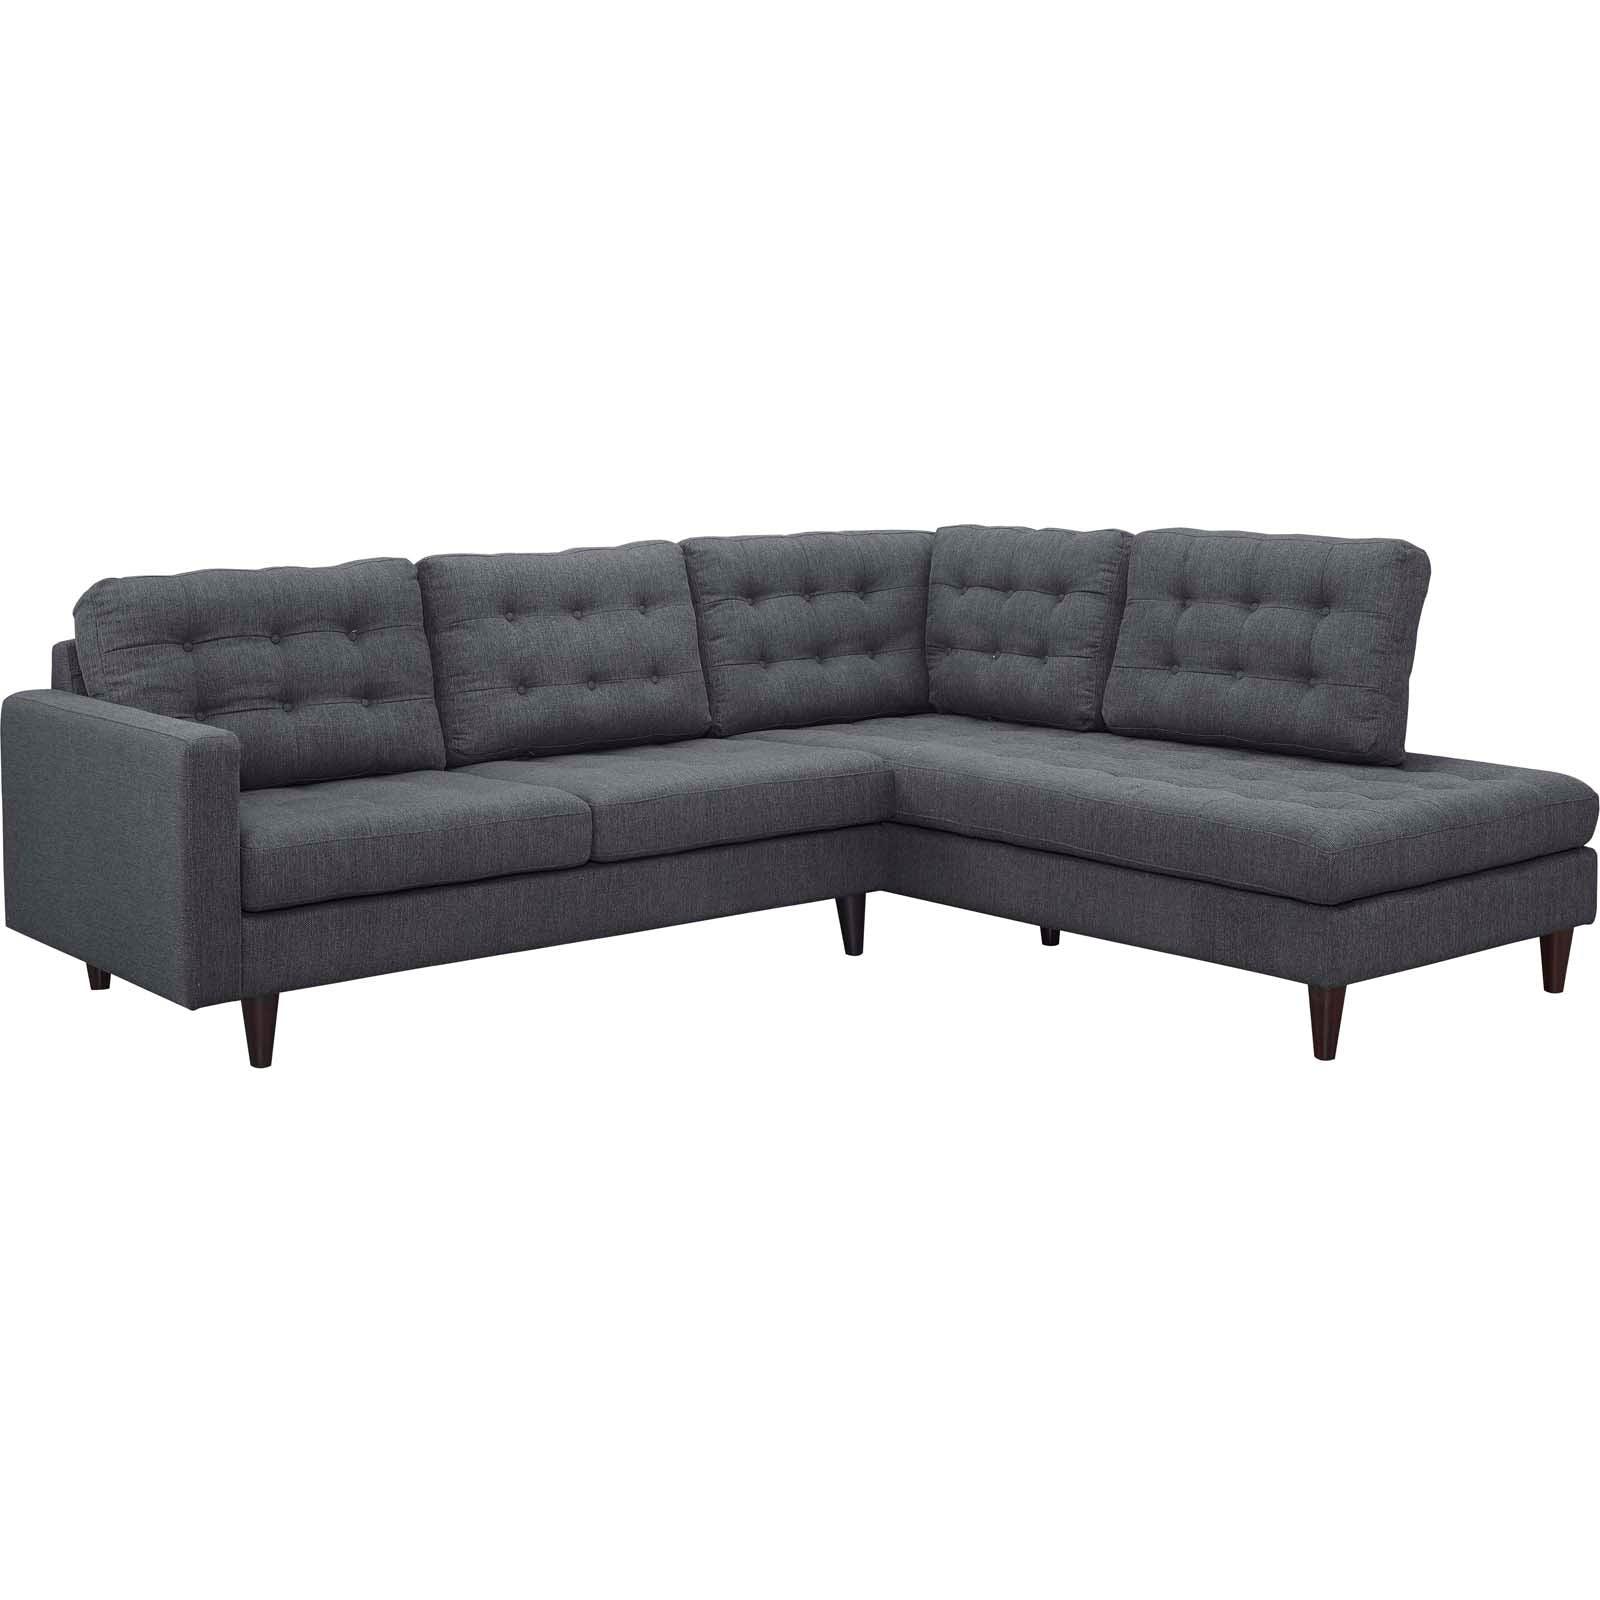 Modway Empress 2 Piece Upholstered Fabric Right Facing Bumper Sectional FredCo